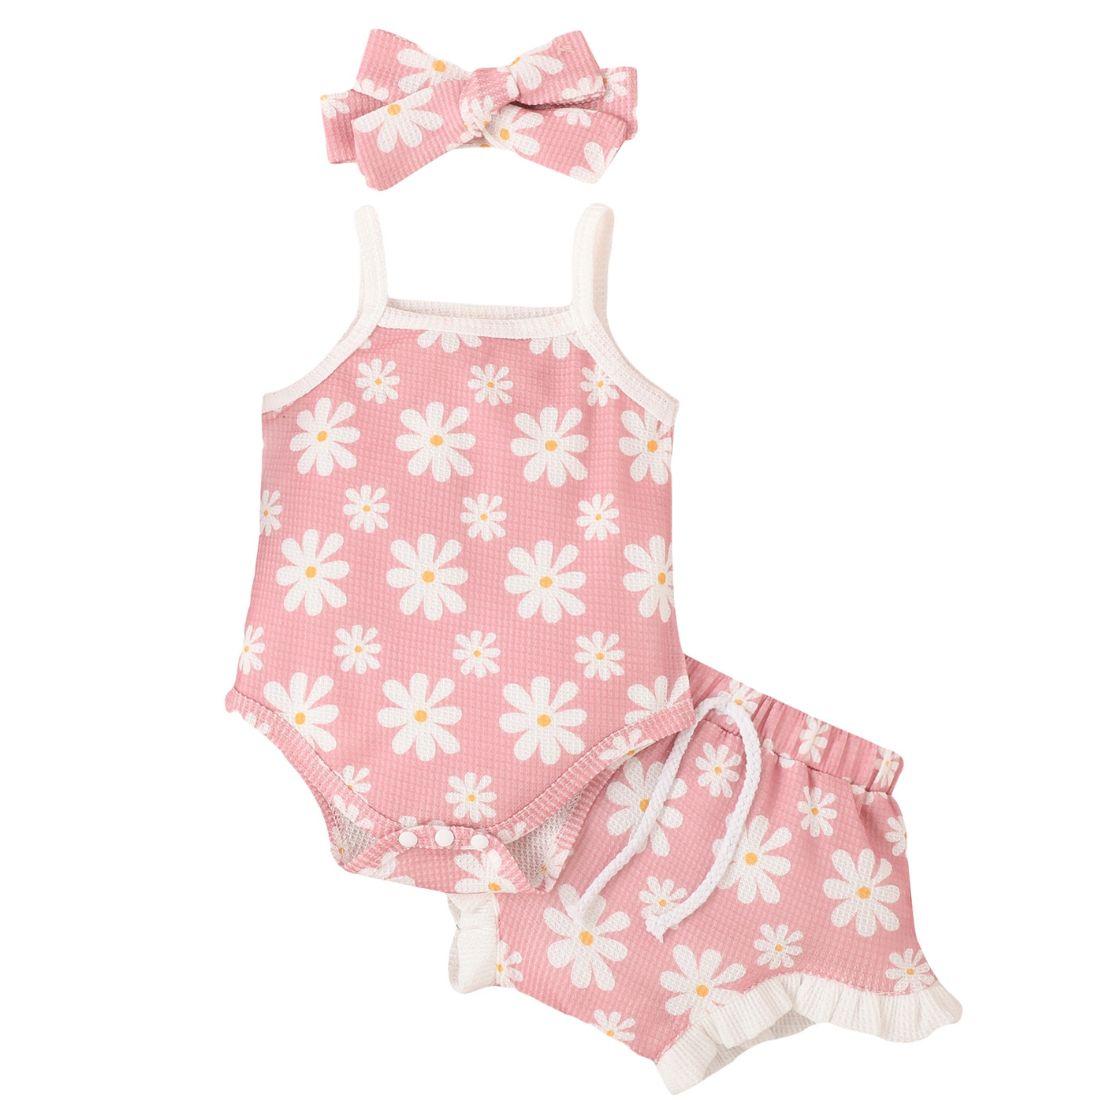 Baby Girl Pink Flower Baby Bodysuit Clothing Set My Trendy Youngsters | Buy on-trend and stylish Baby and Toddler Clothing Sets @ My Trendy Youngsters - Dress your little one in Style @ My Trendy Youngsters 